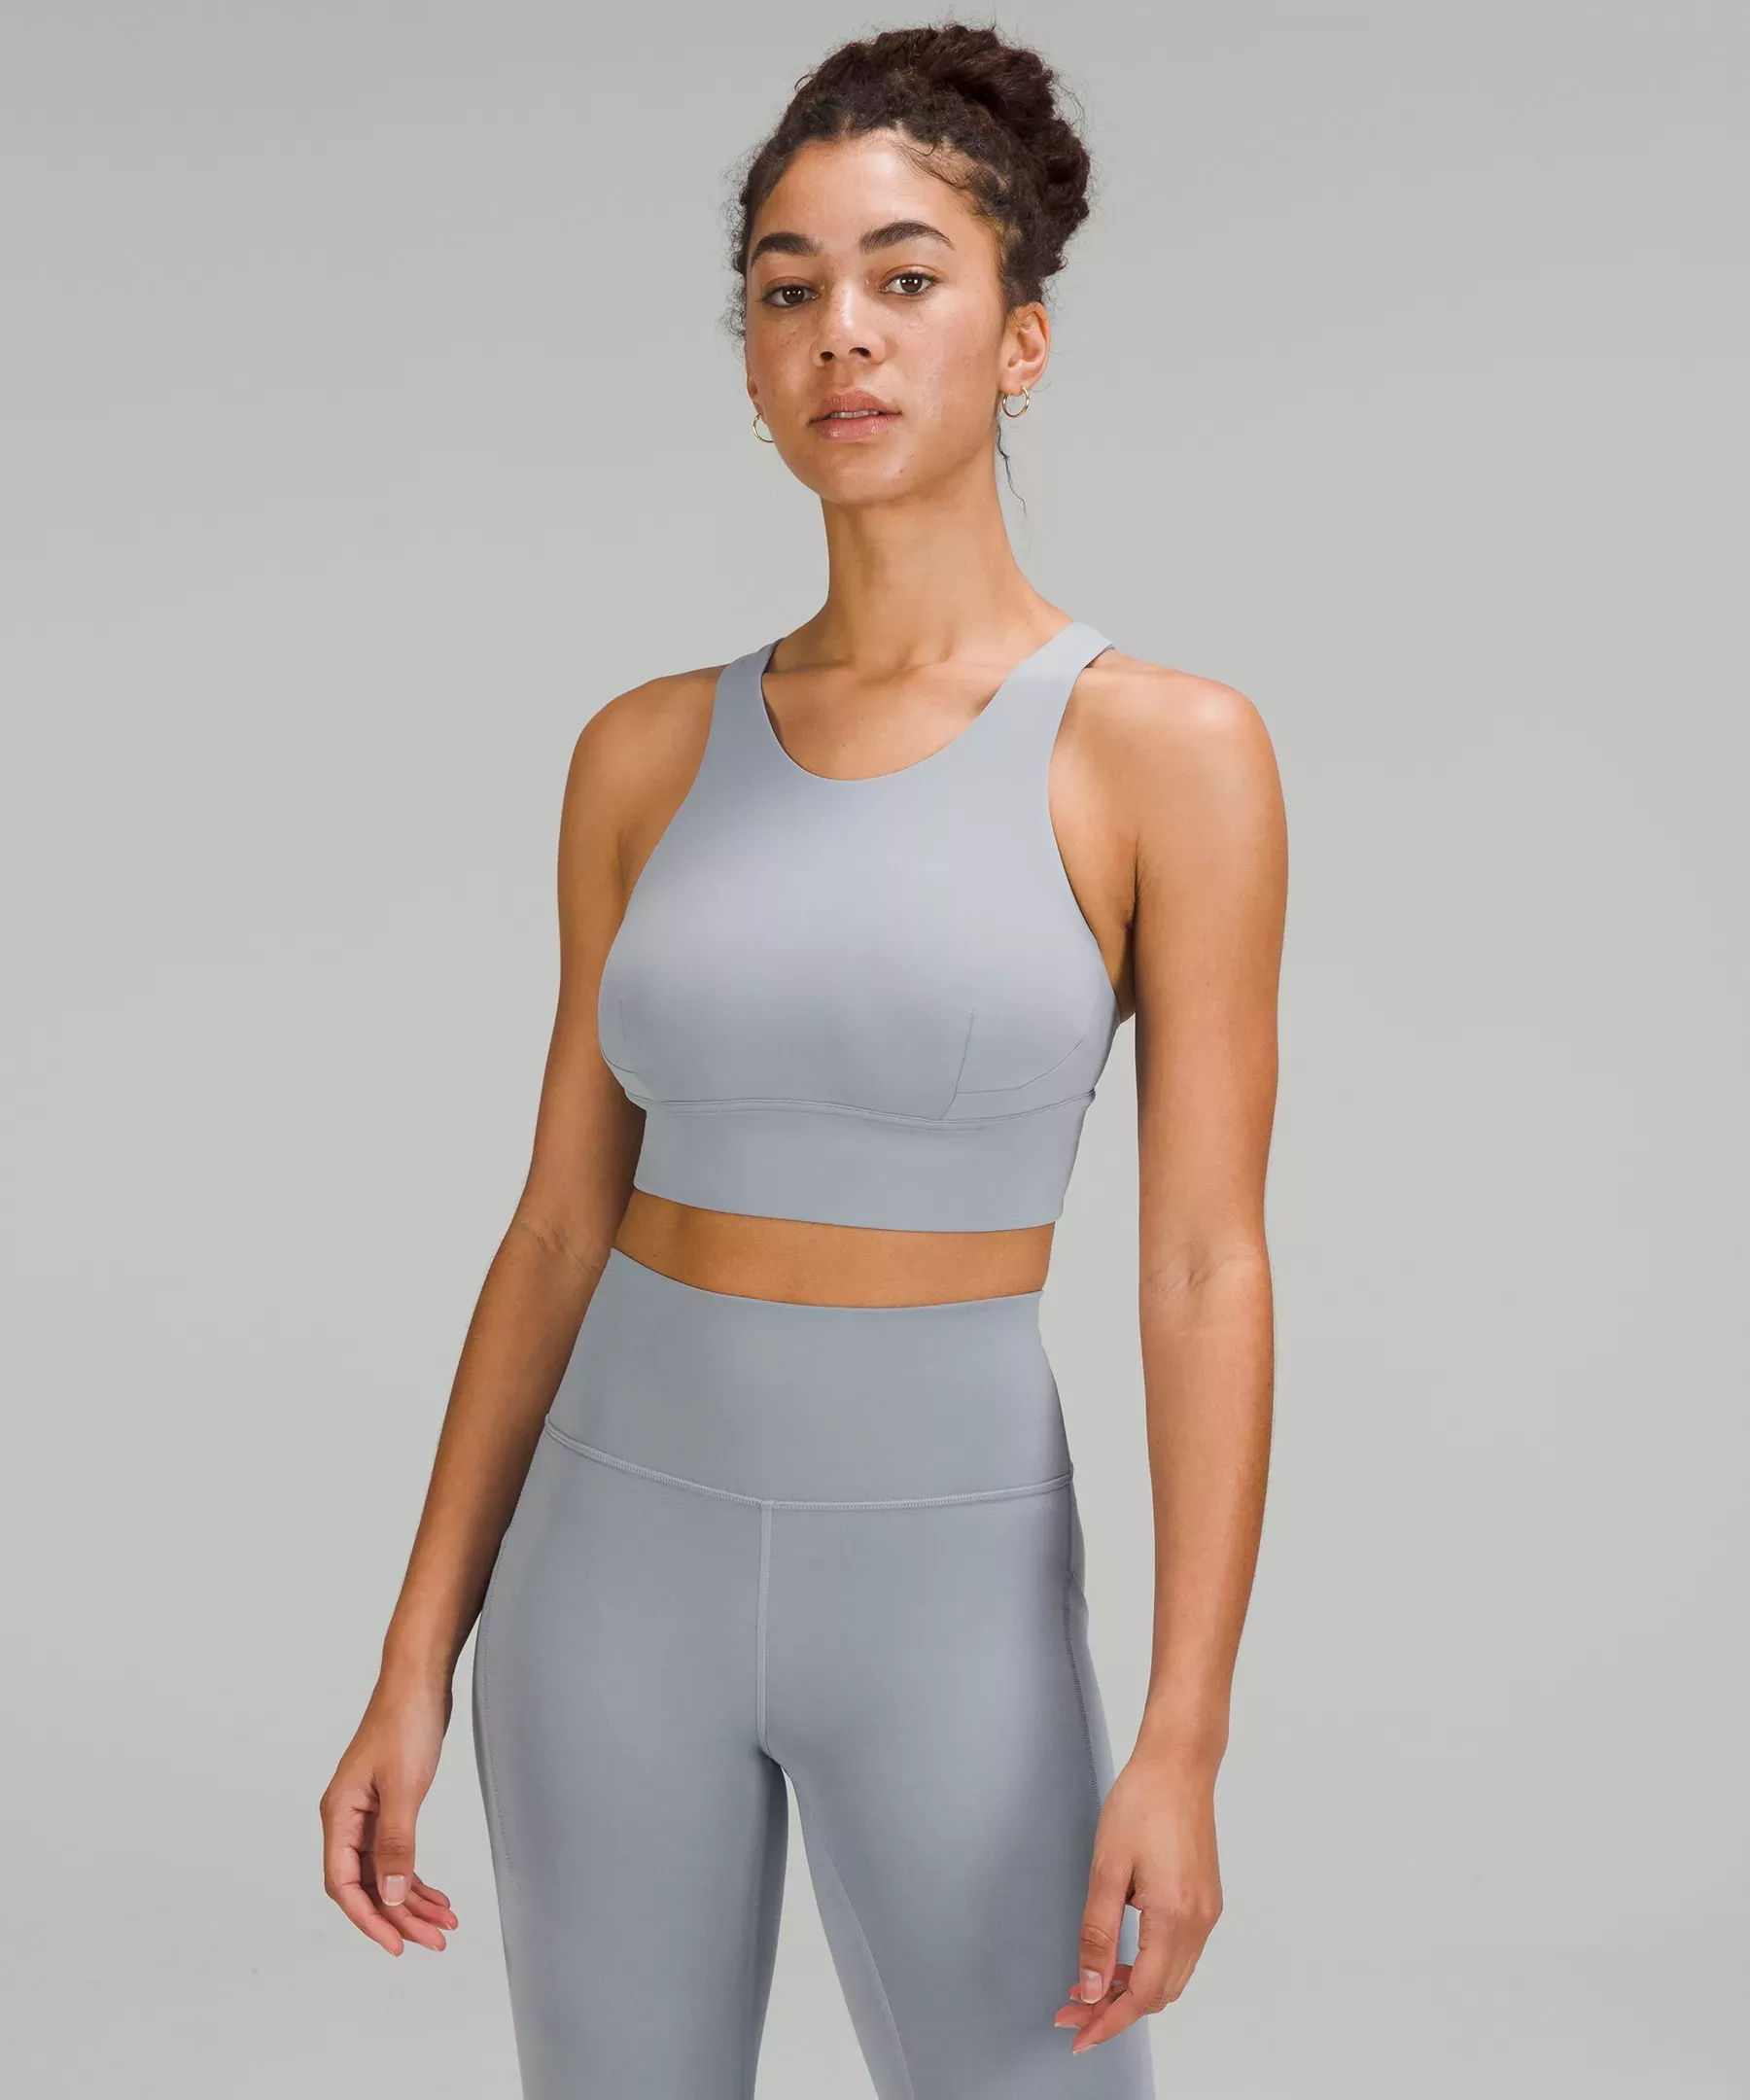 Stand out in new styles 🤟 New OTF Performance Gear. New Orangetheory //  lululemon. Need we say more? Get yours now online, or in person…